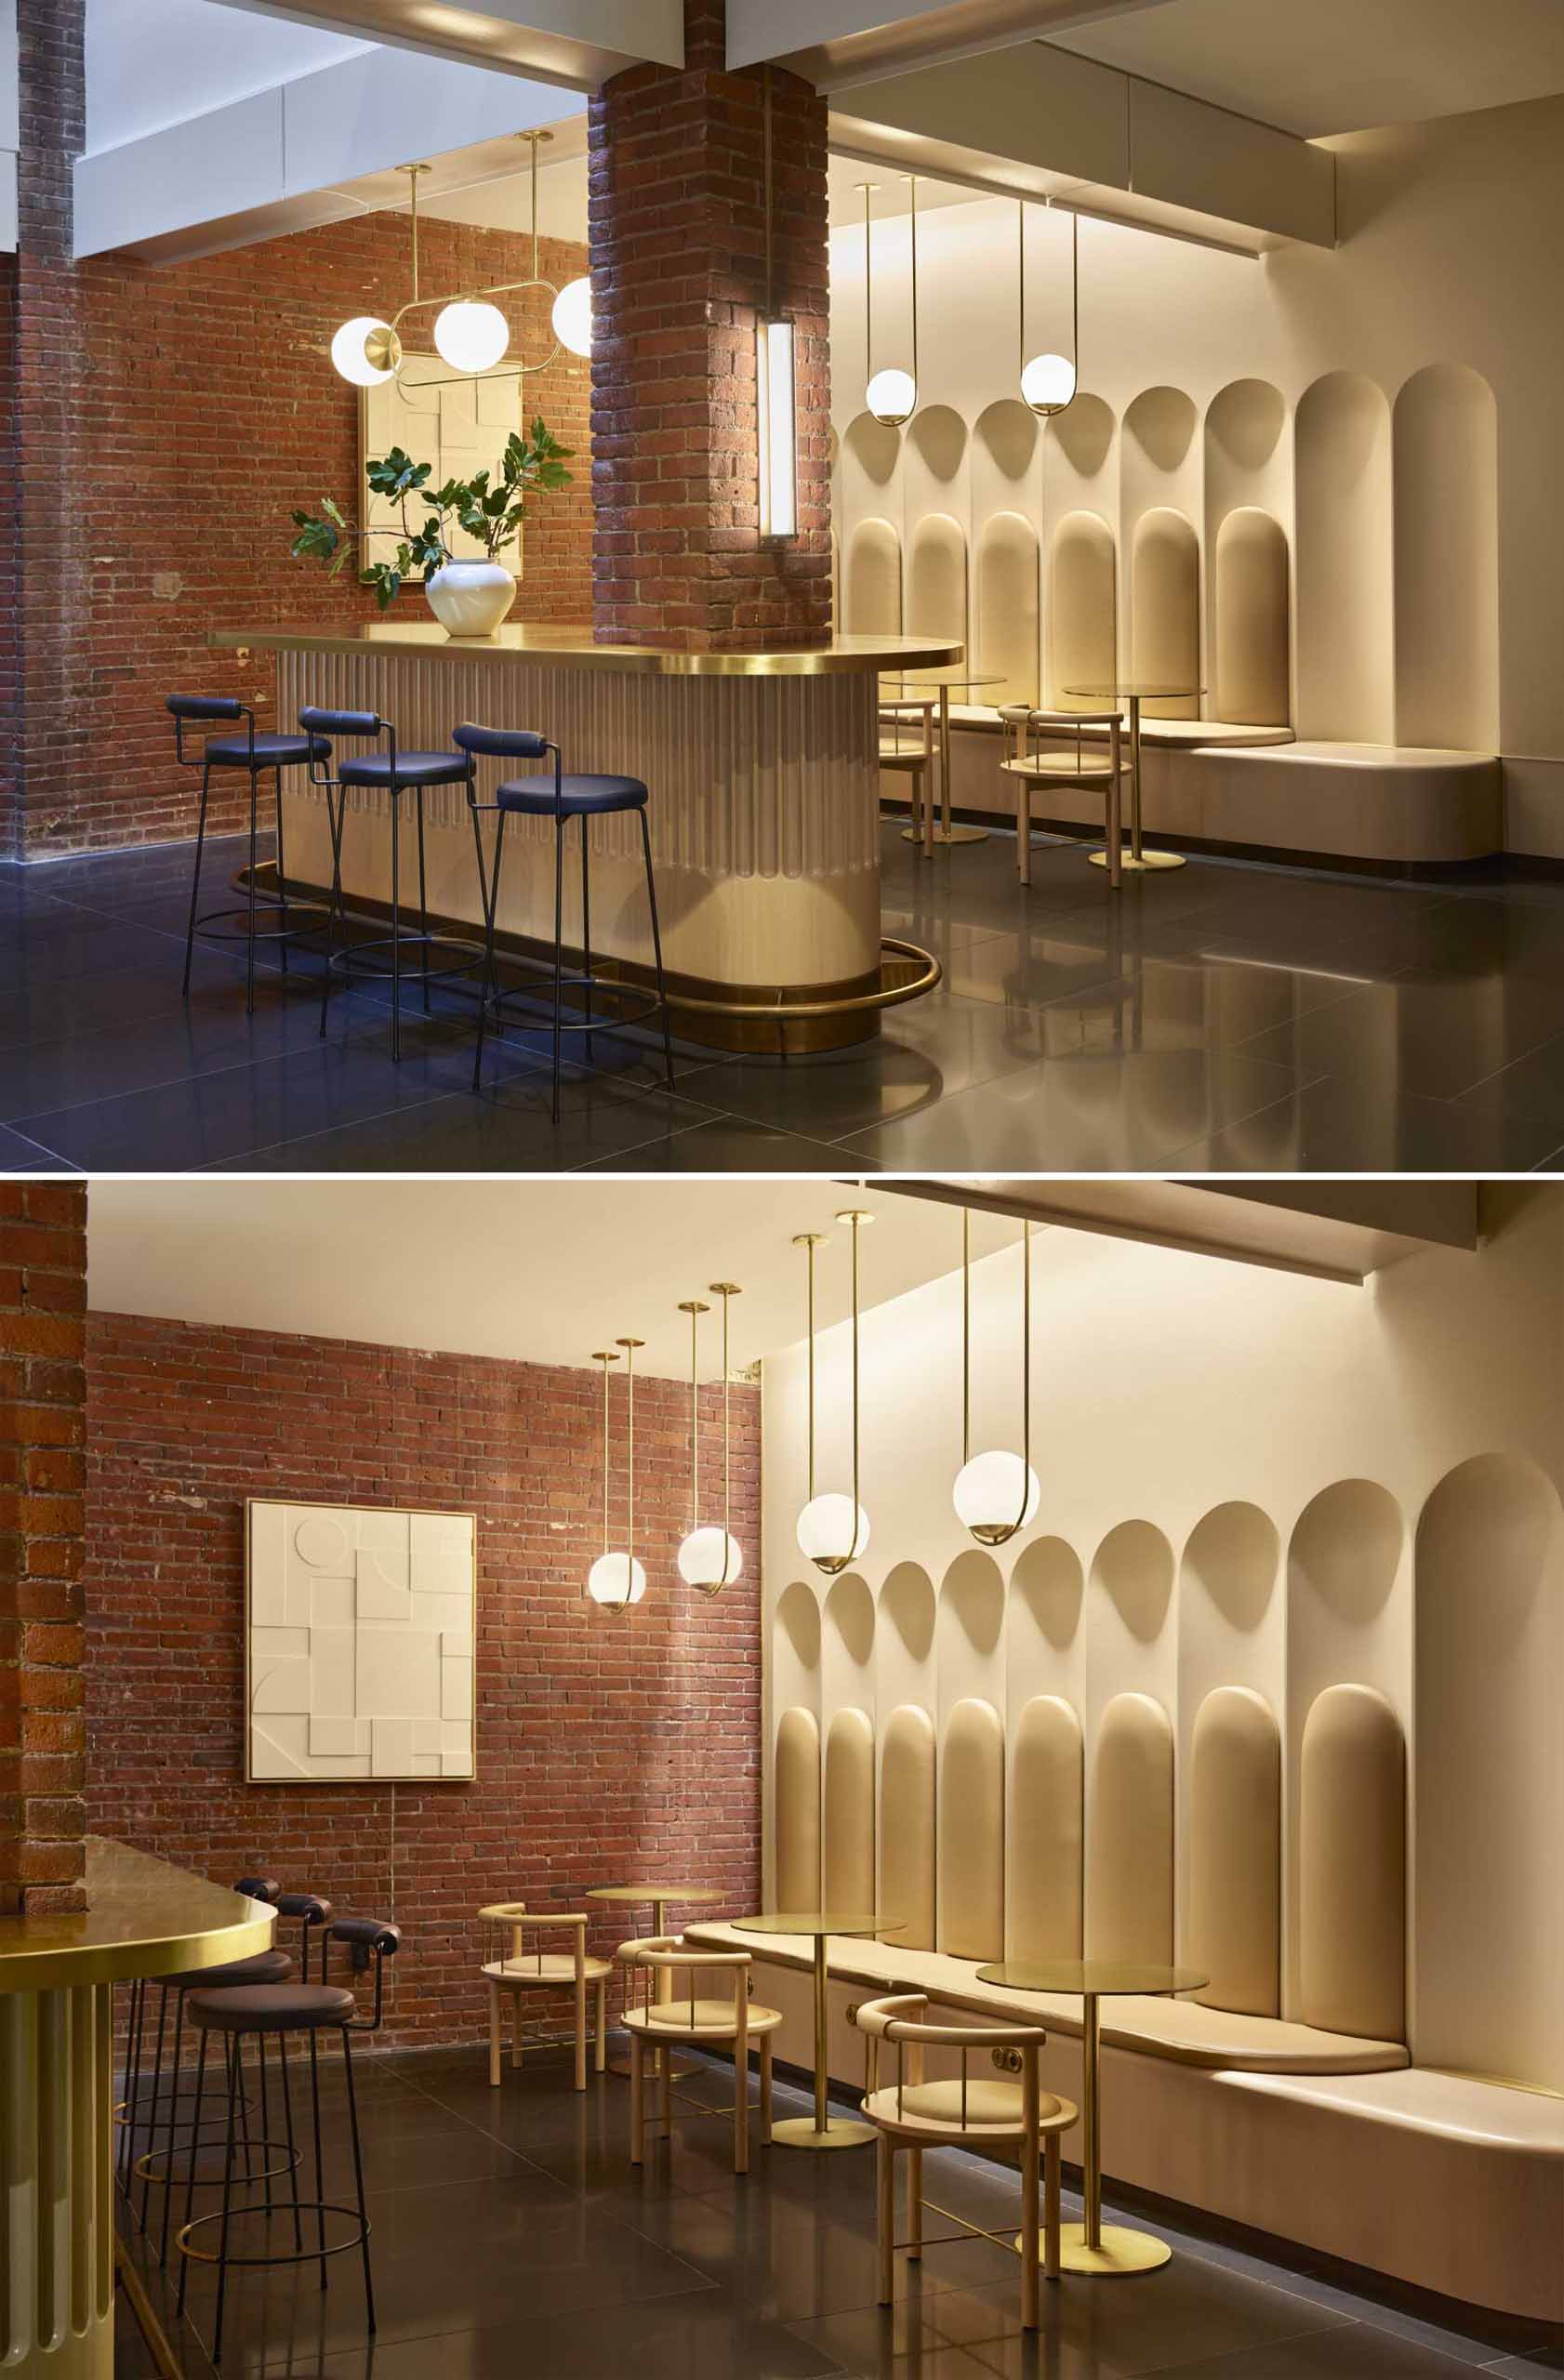 A contemporary lobby in an office building with original brick walls and arched geometry.